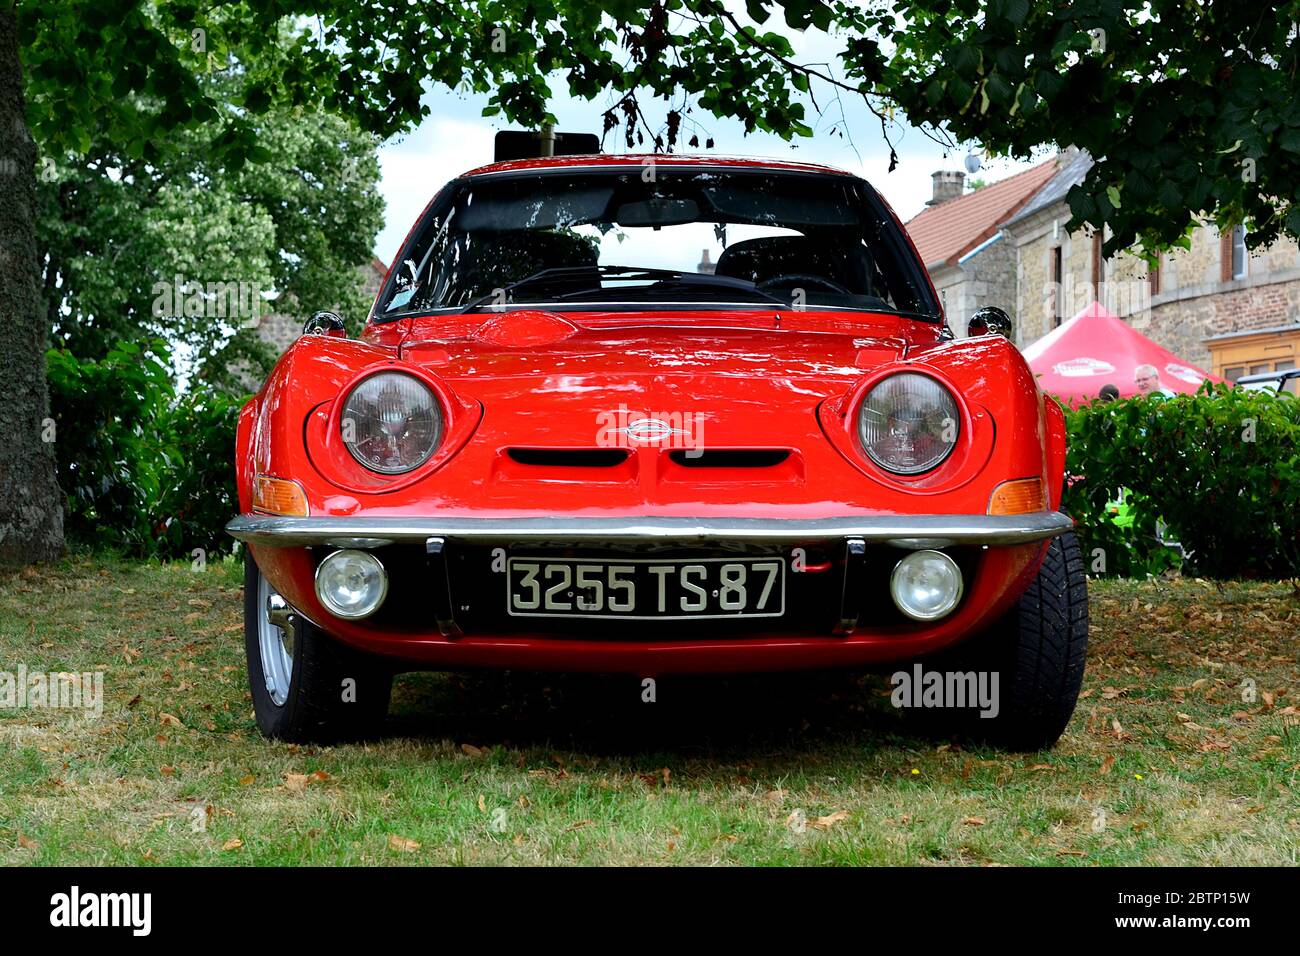 Opel Gt Classic High Resolution Stock Photography and Images - Alamy